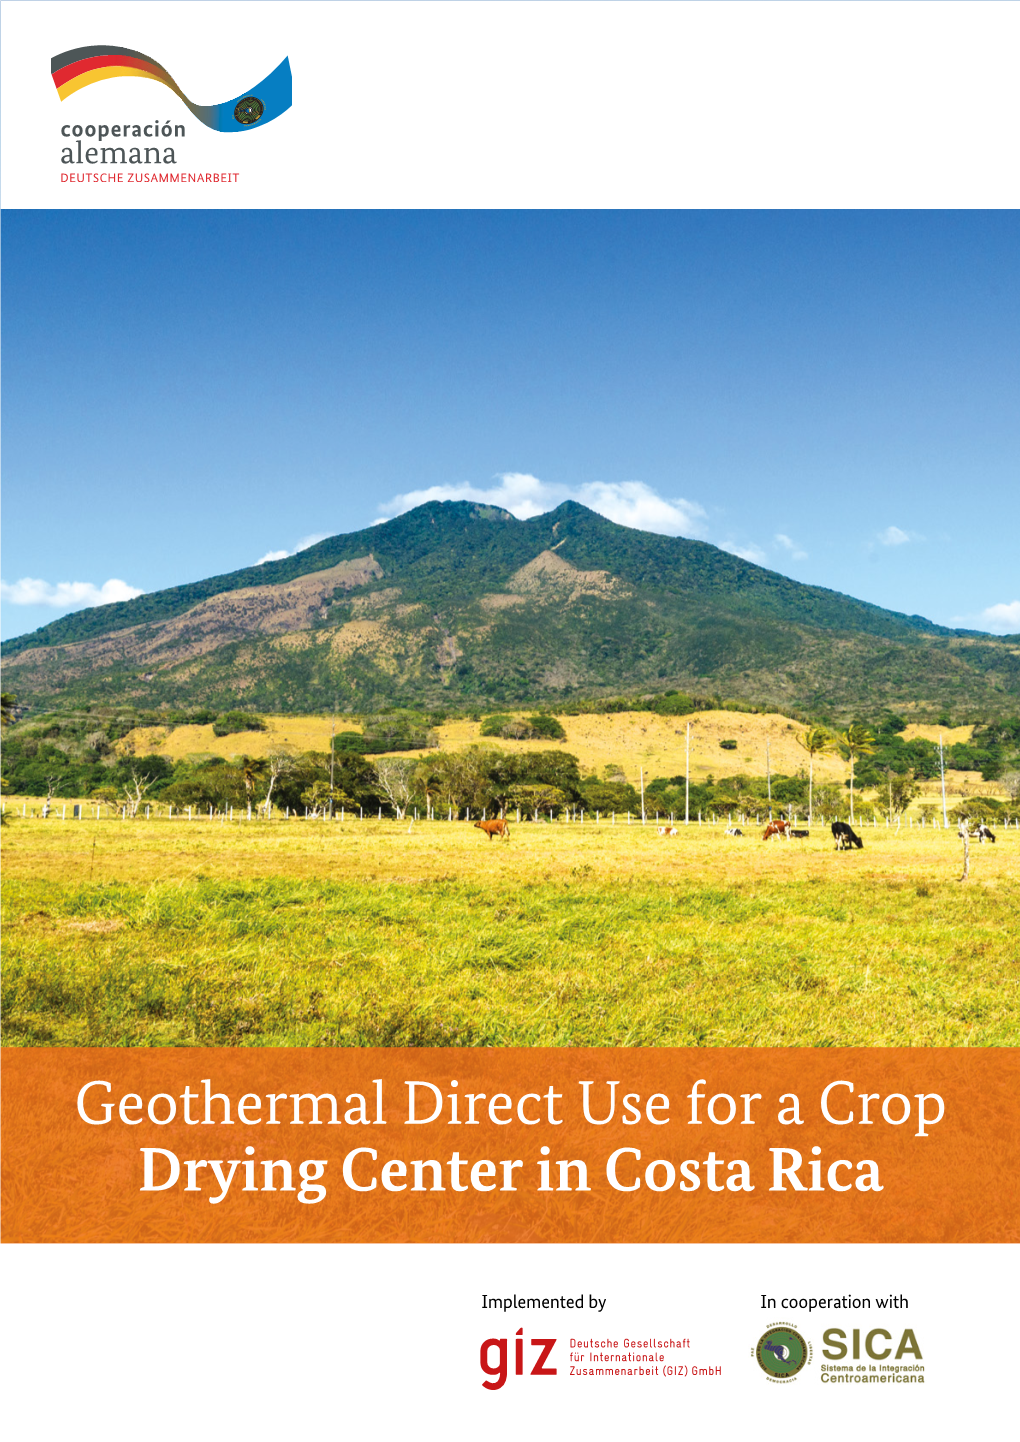 Geothermal Direct Use for a Crop Drying Center in Costa Rica